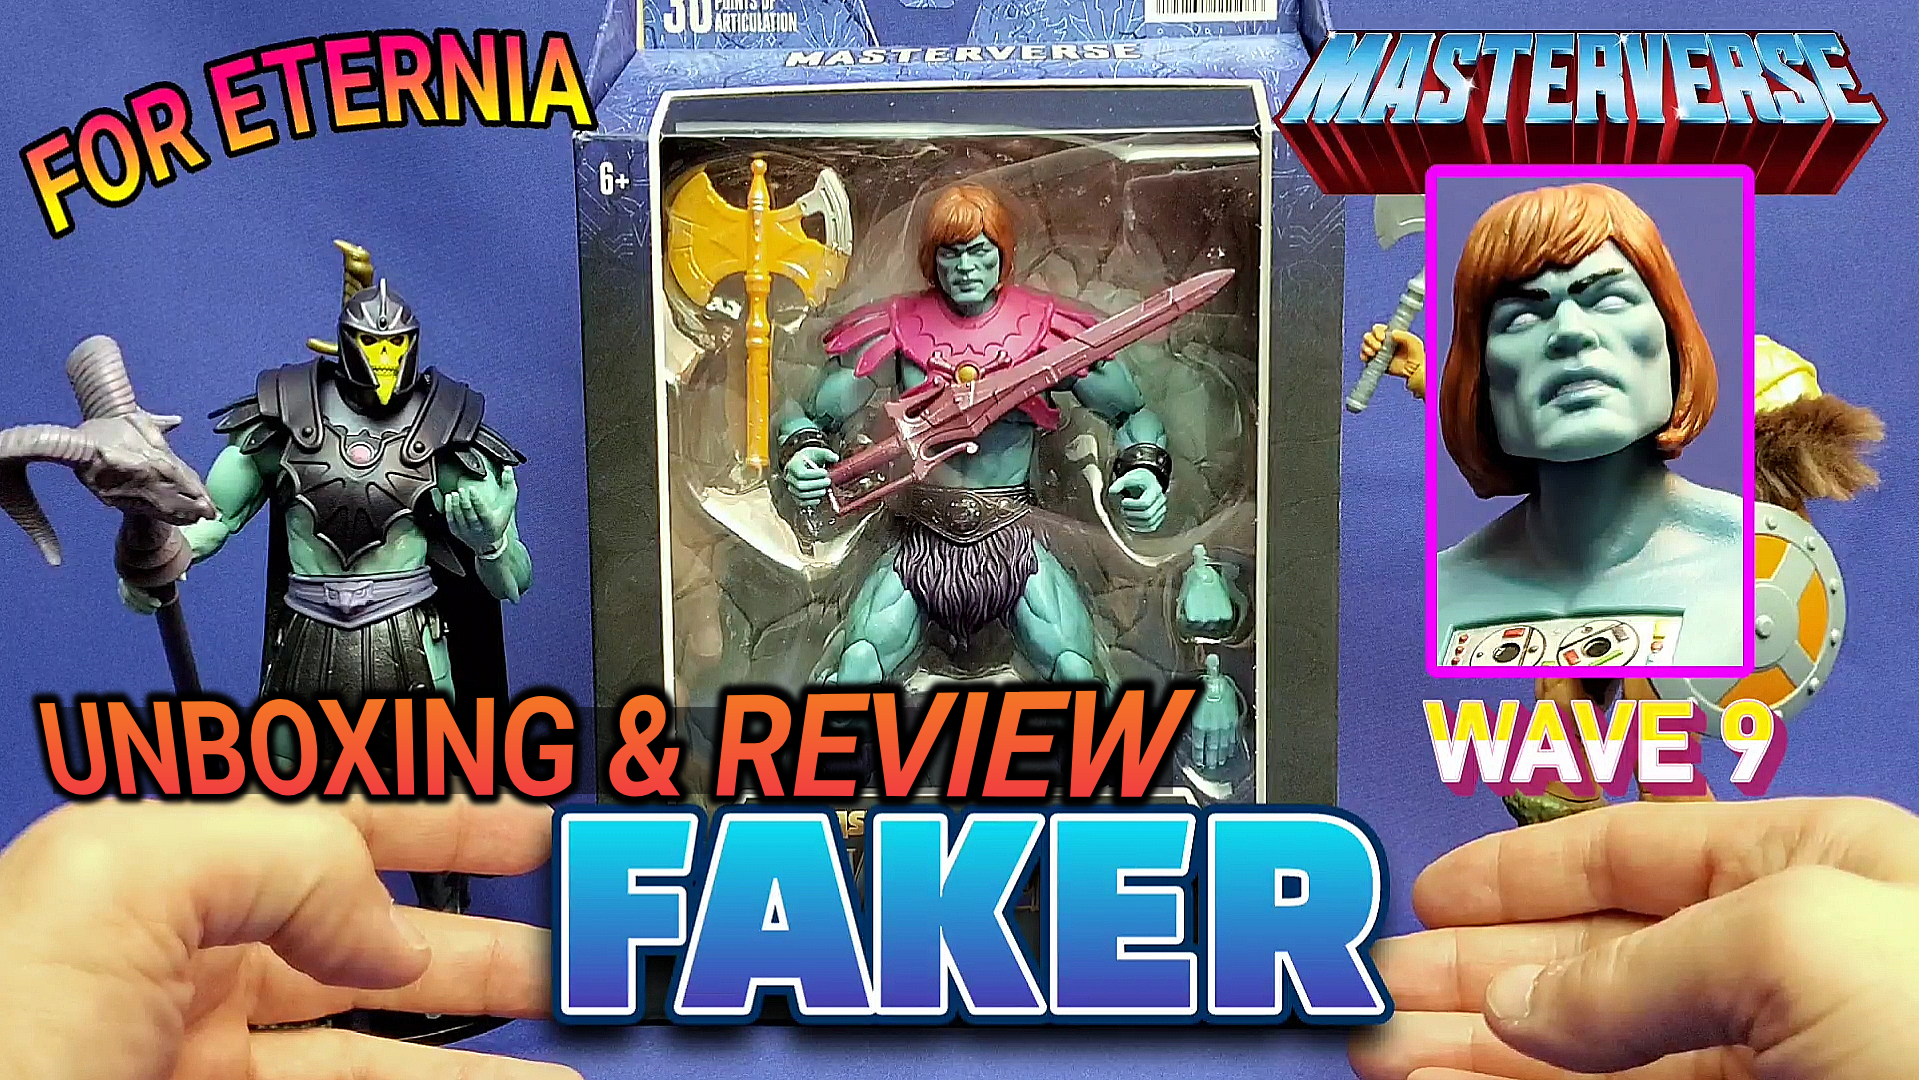 Watch our UNBOXING & REVIEW of the MASTERVERSE Faker Wave 9 New Eternia Figure